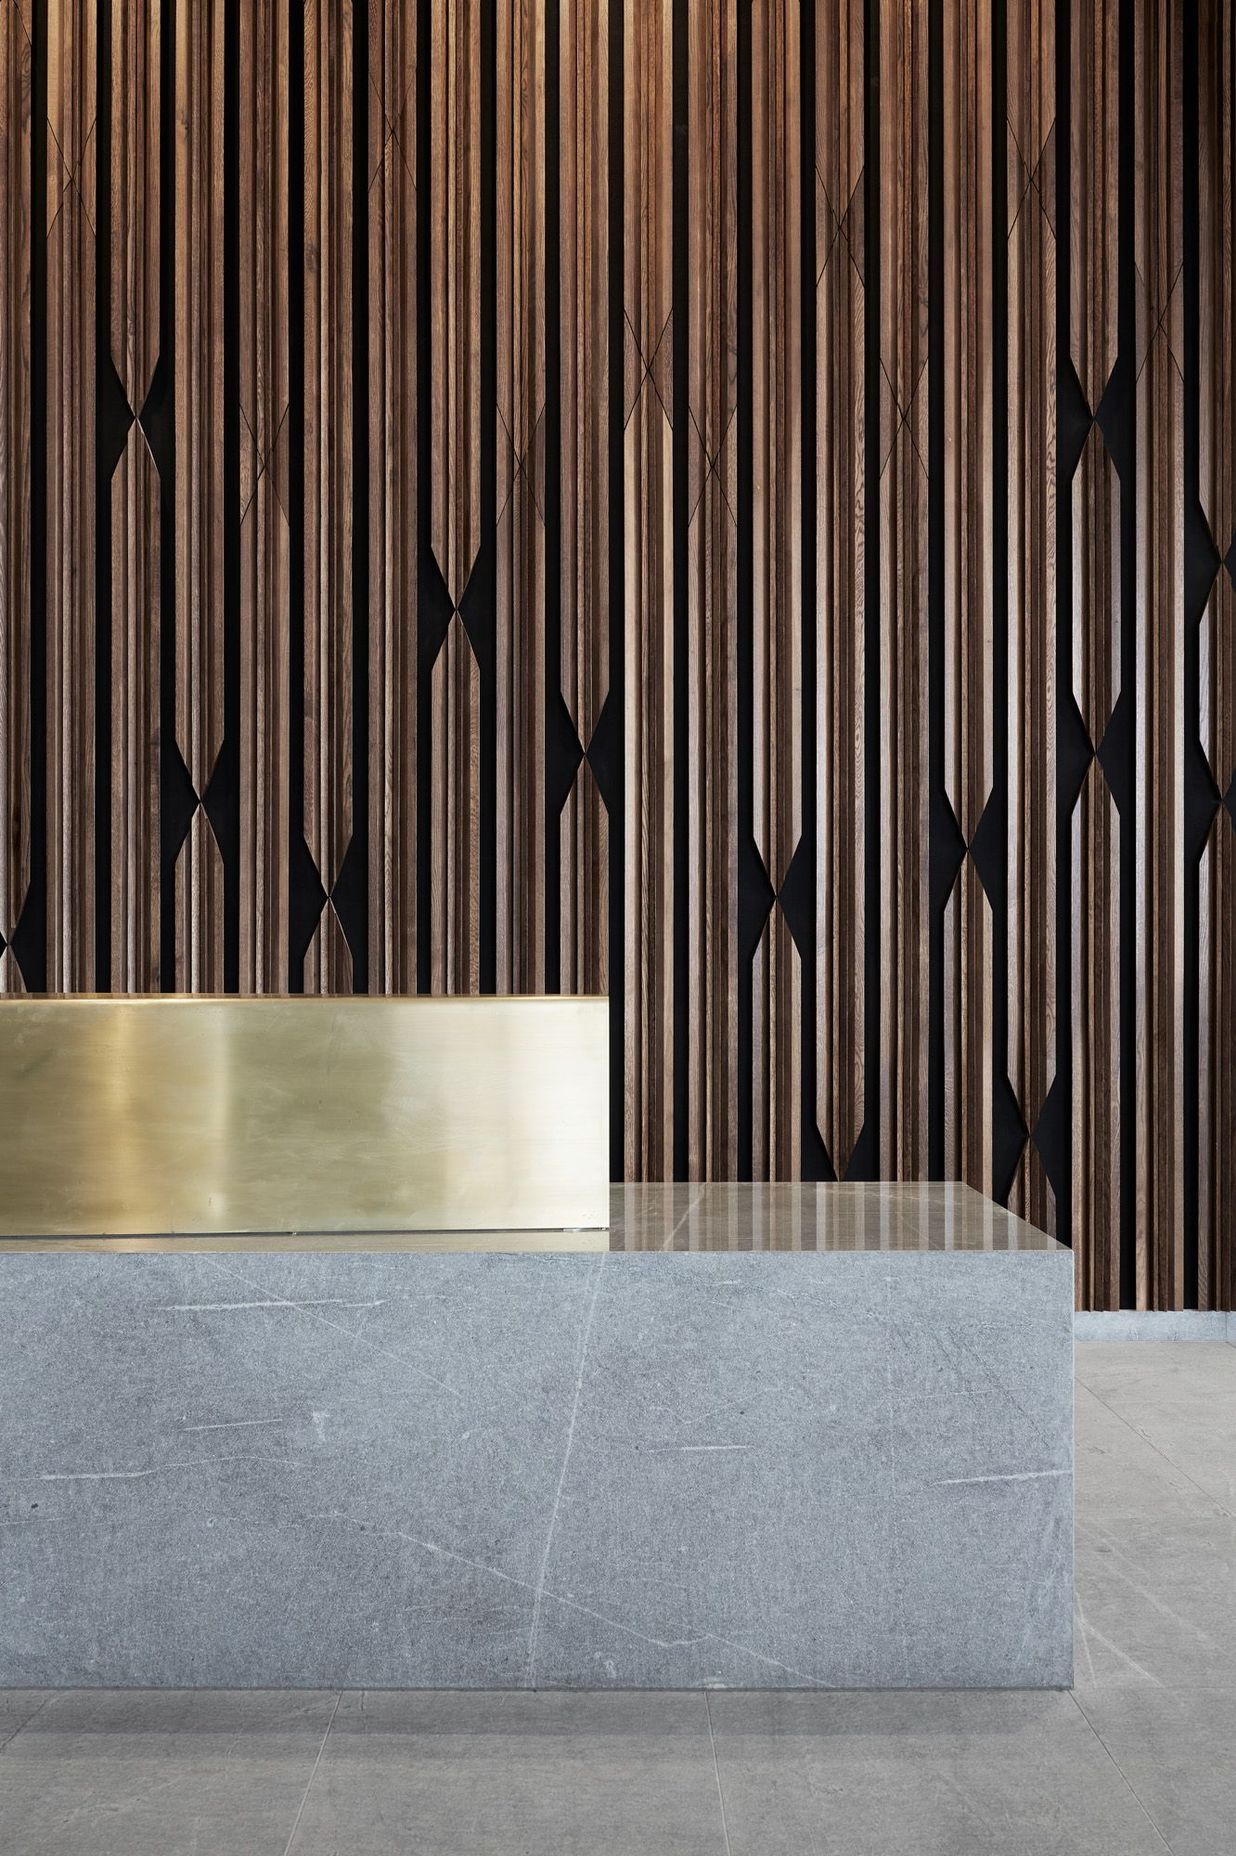 Timber panelling creates a warm backdrop to the hard reception desk.